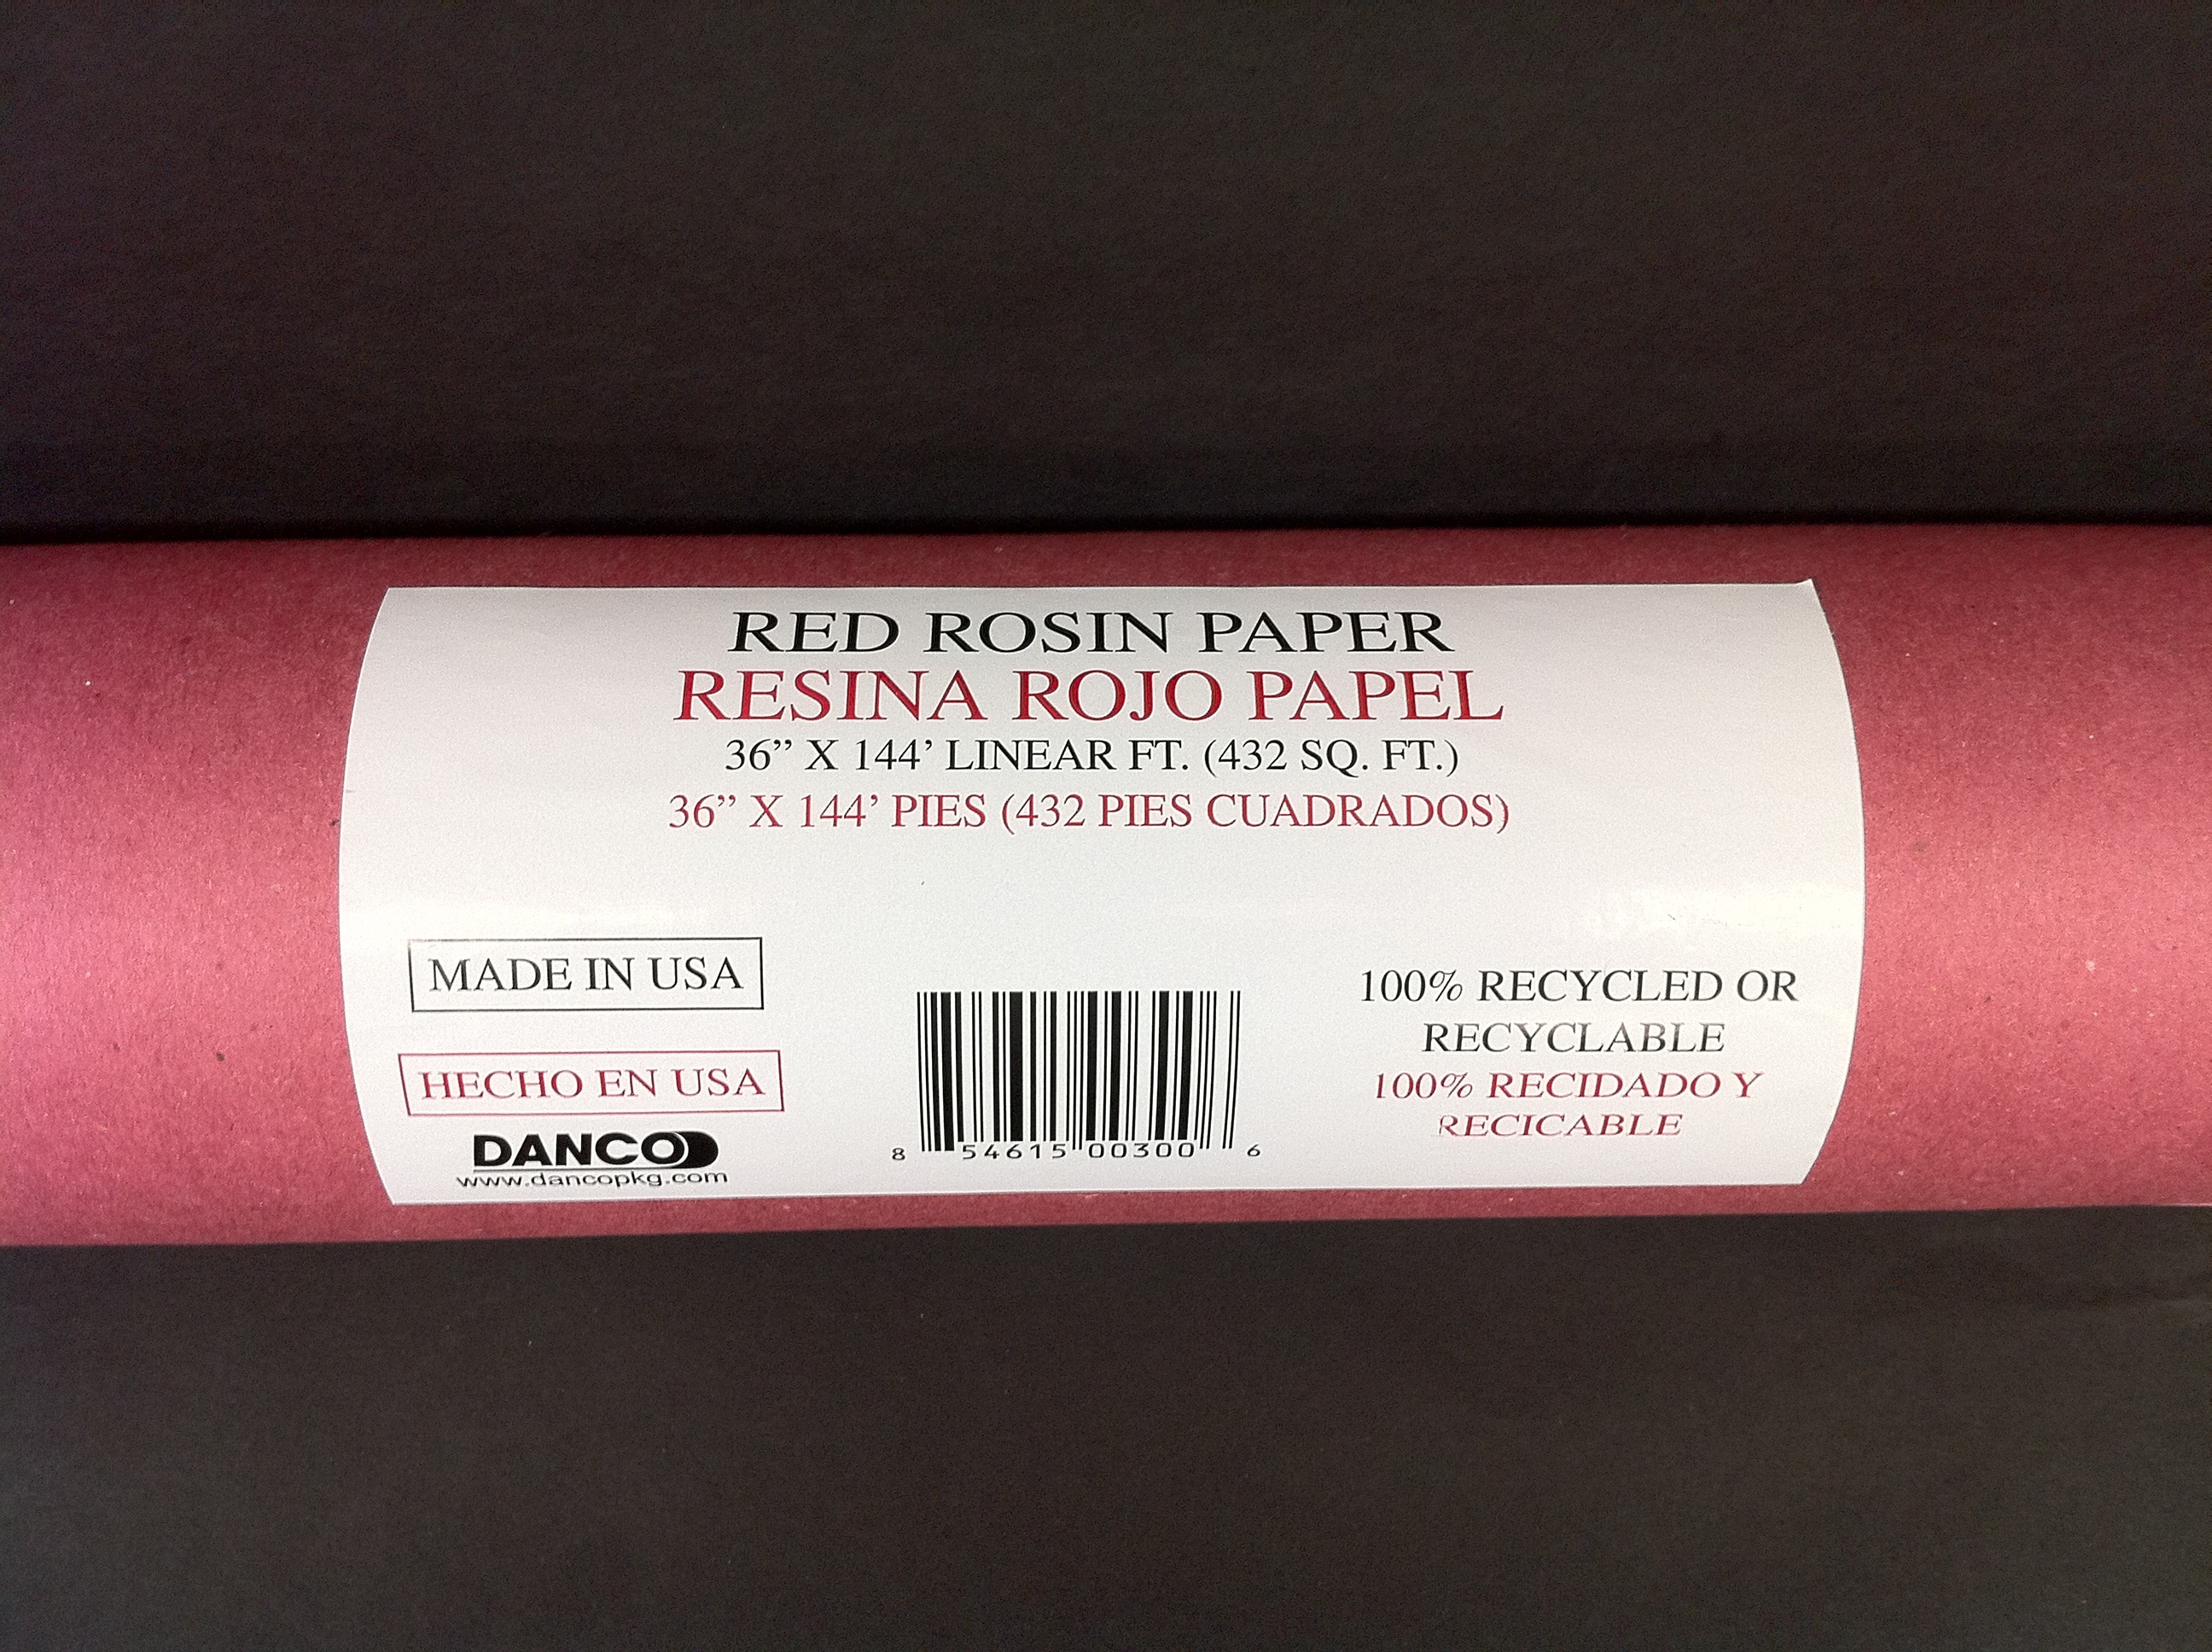 Red Rosin Paper - NEW!